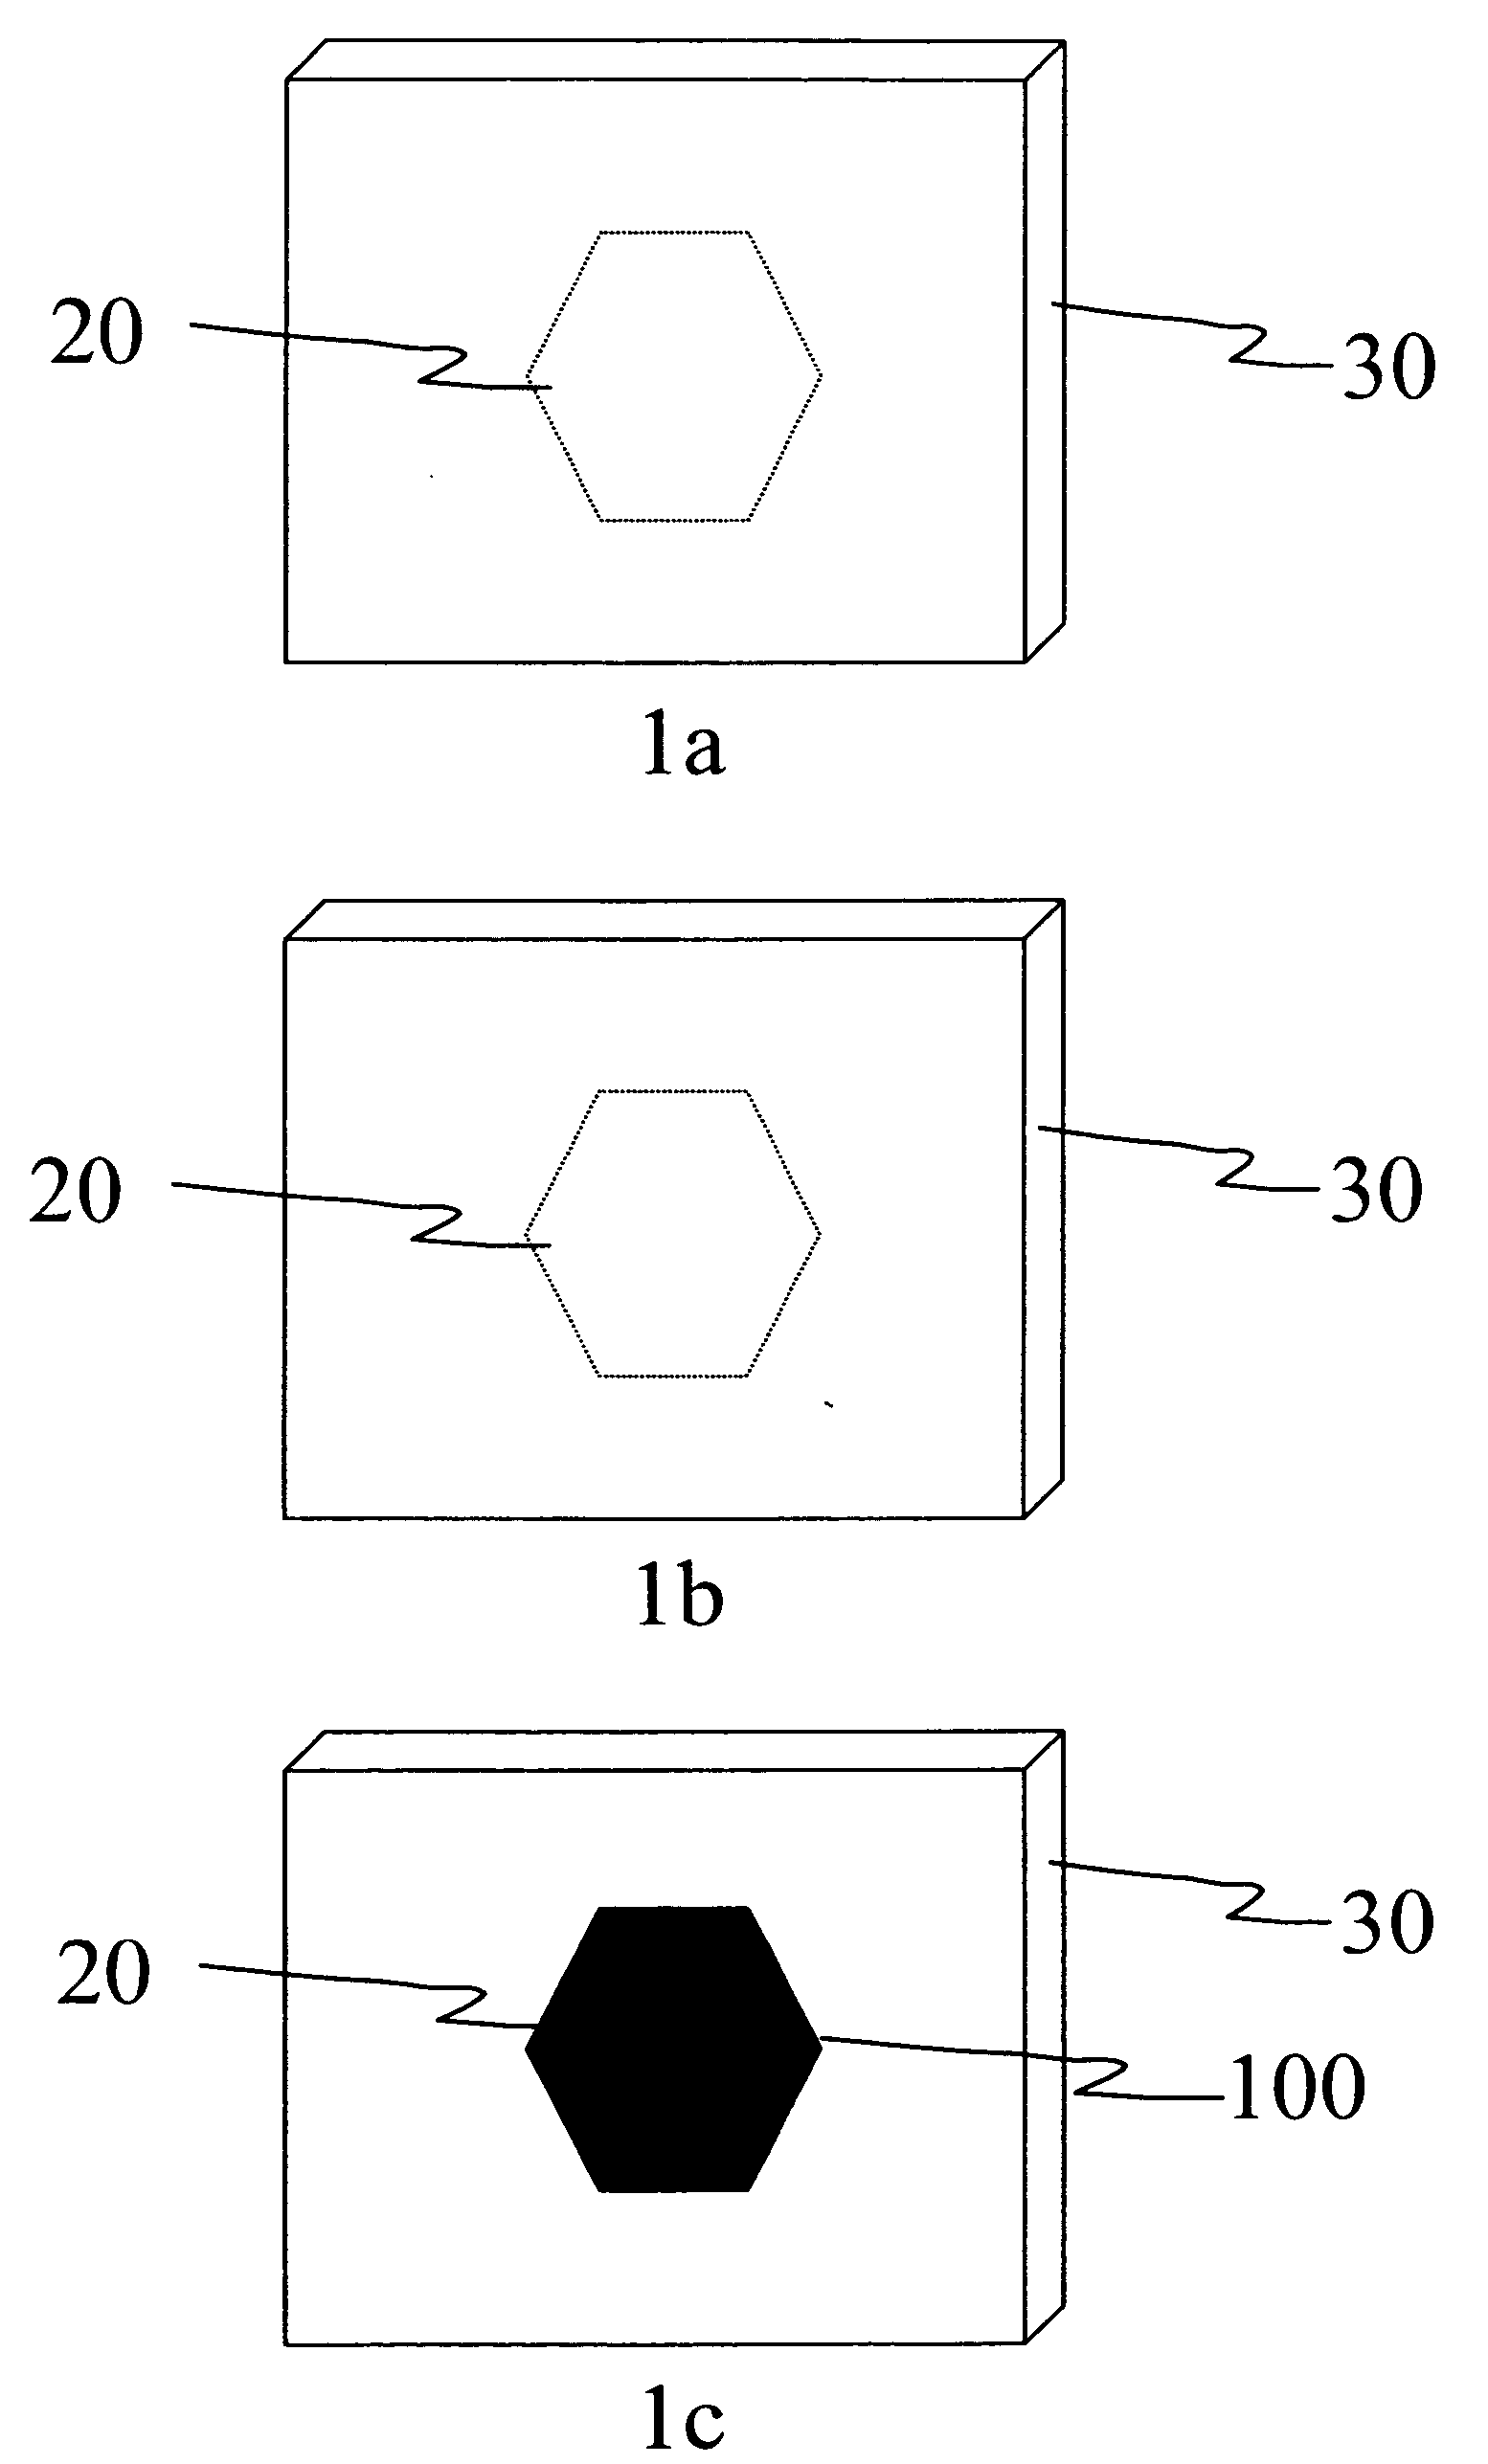 Media for detection of X-ray exposure